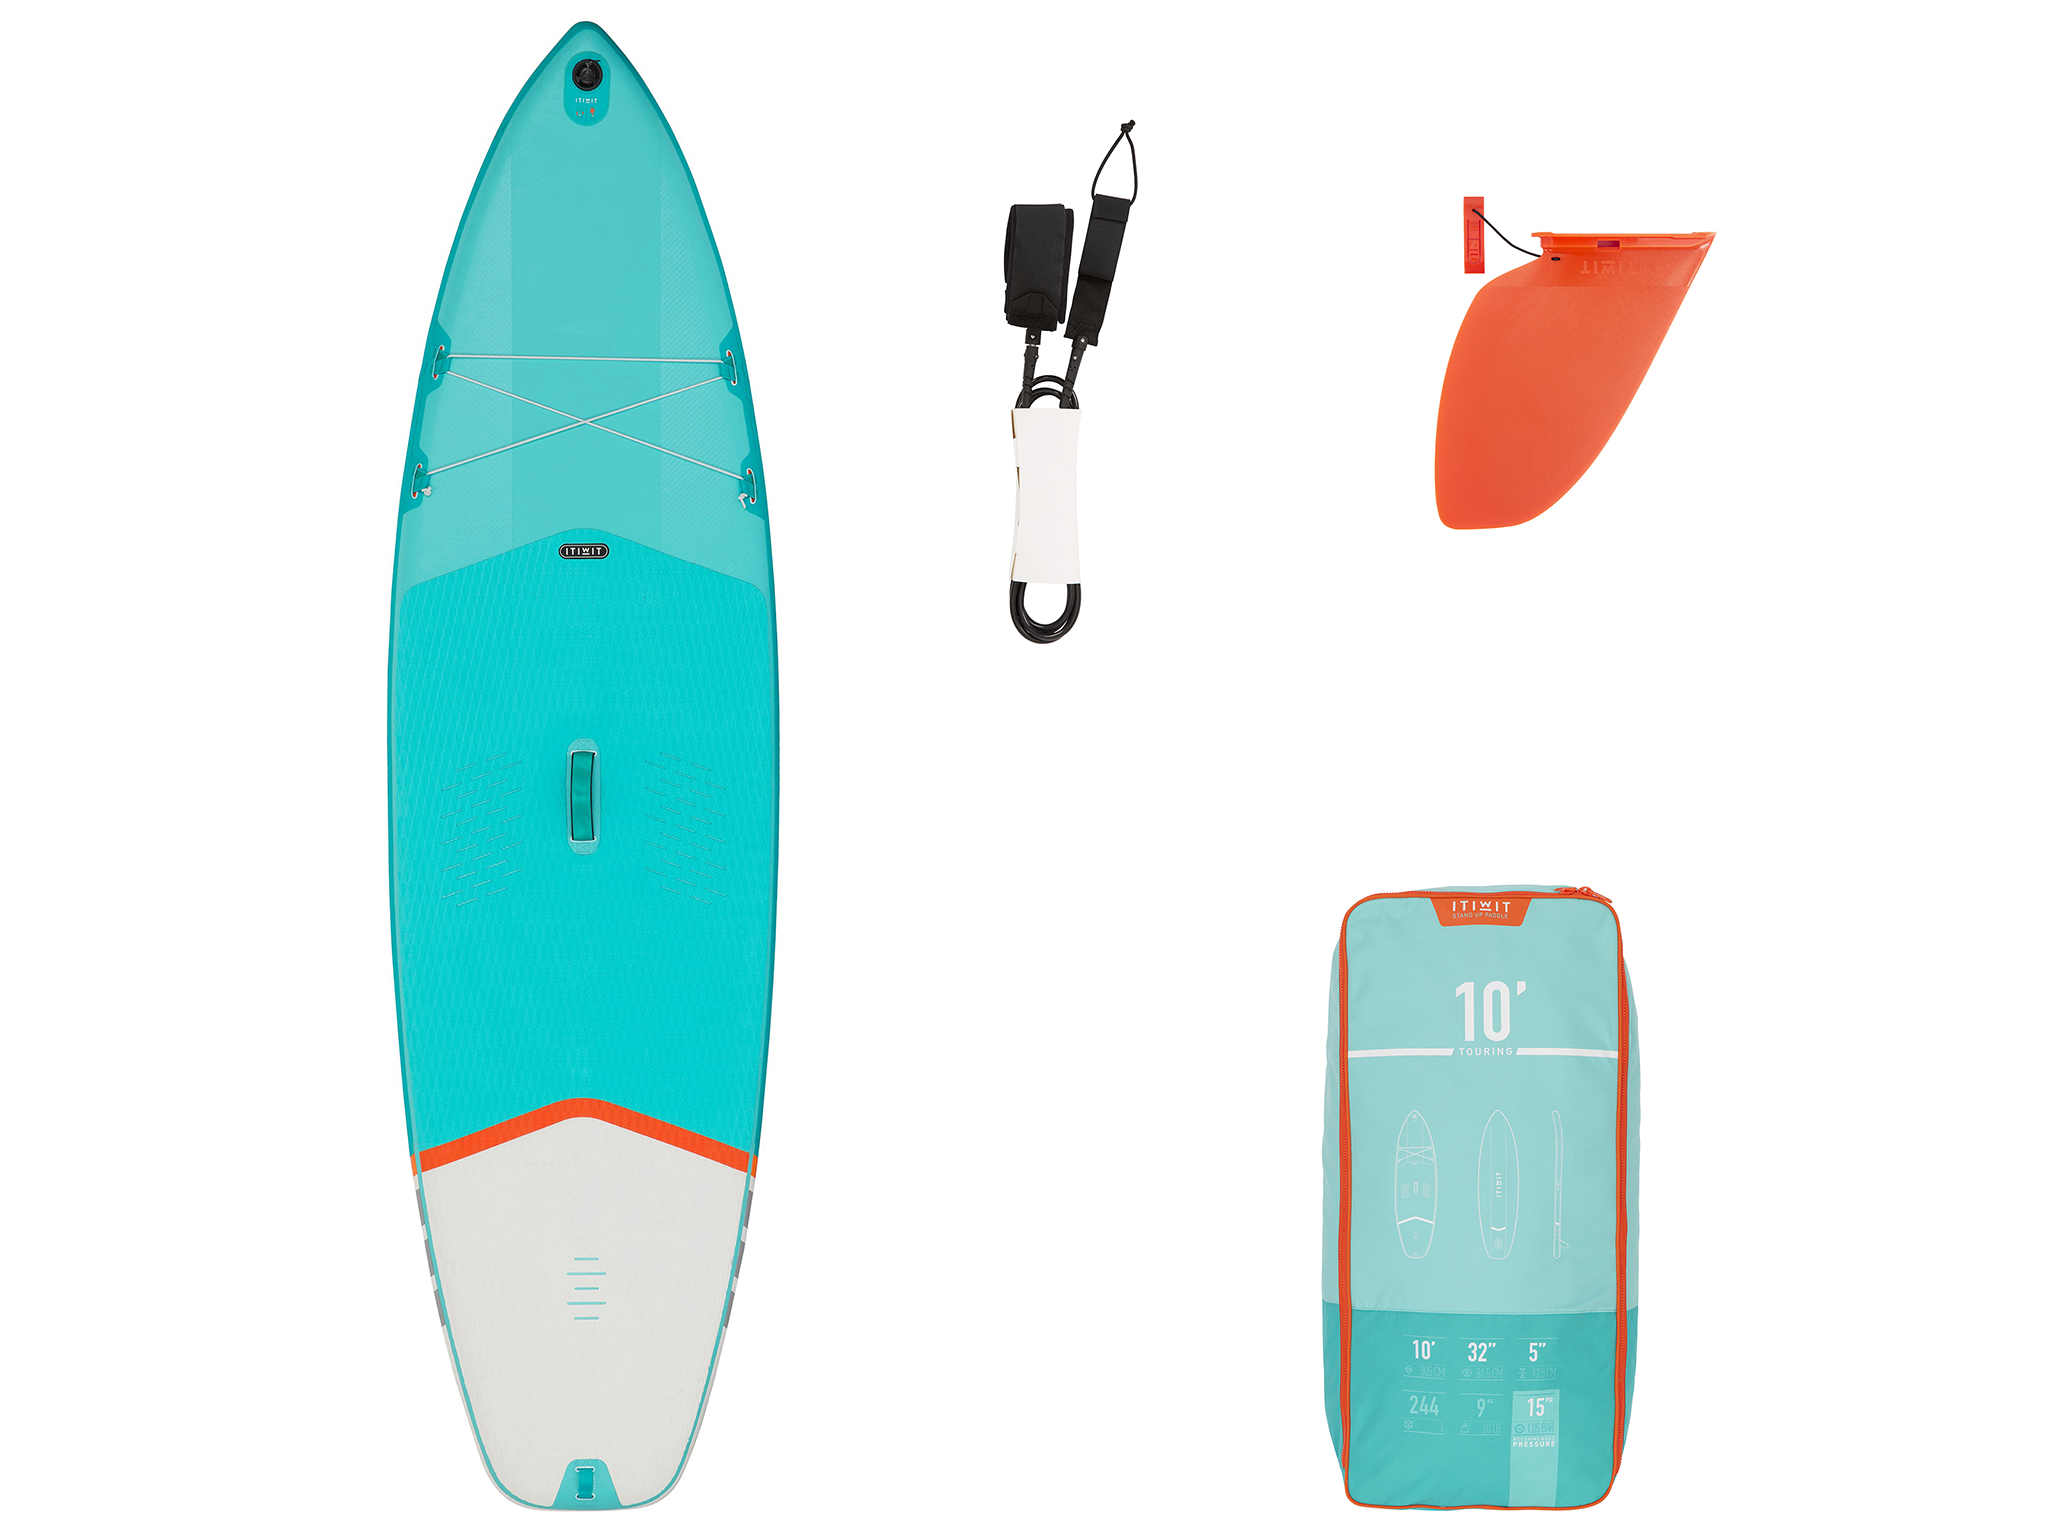 Itiwit X100 10ft touring inflatable stand-up paddleboard